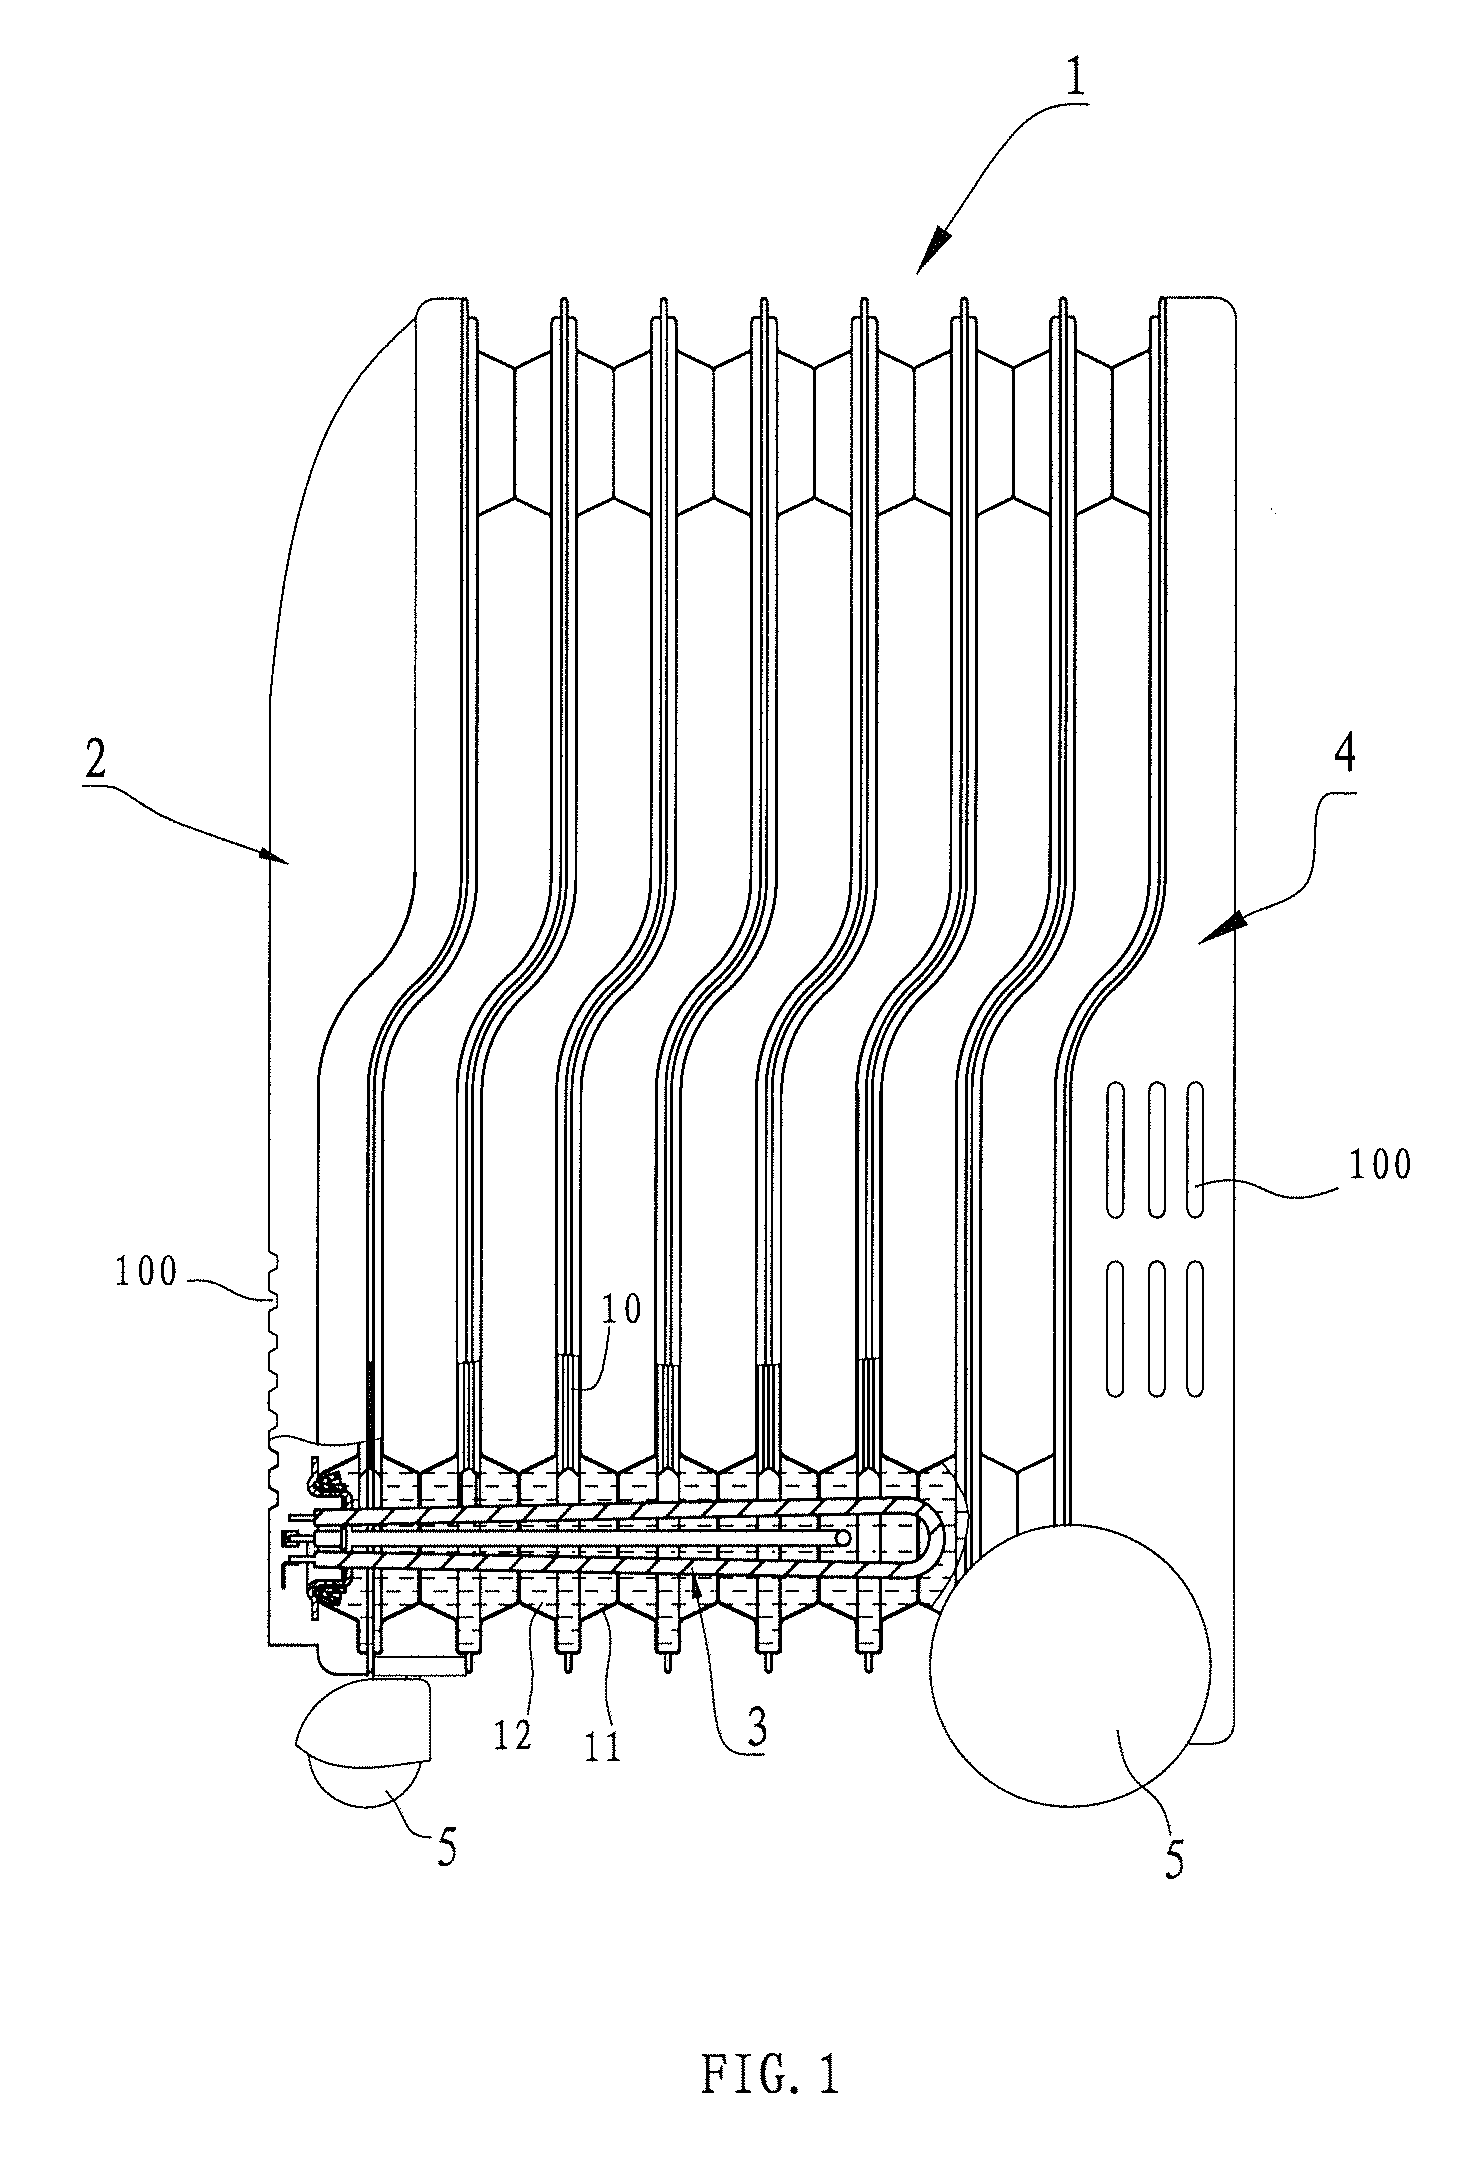 Electric radiator filled with oil